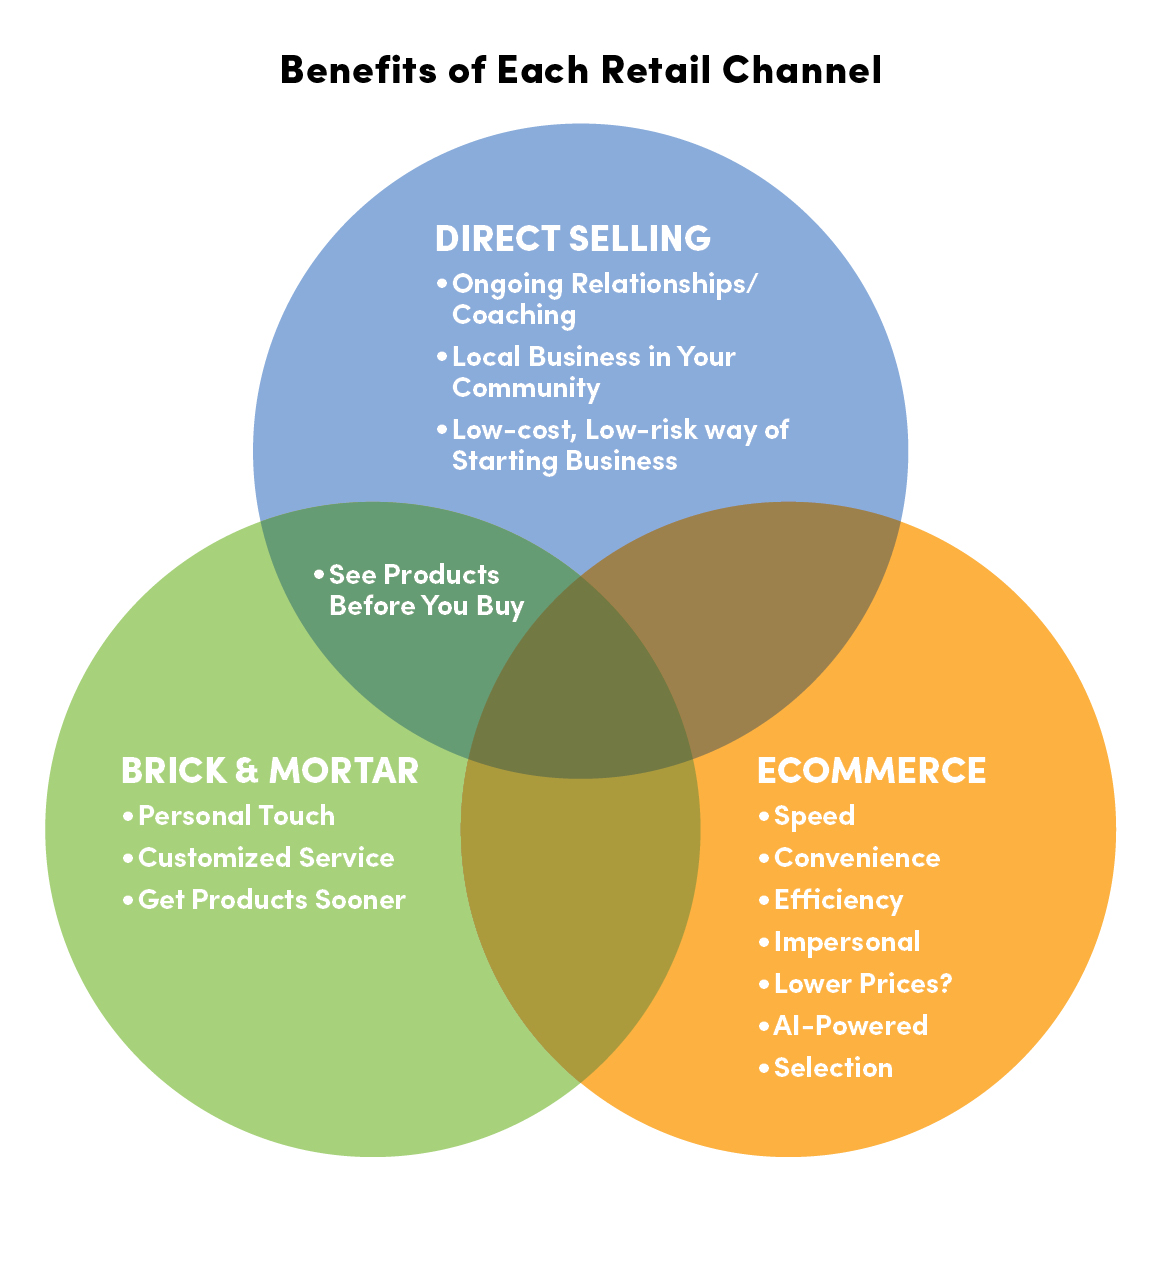 Benefits of Each Retail Channel